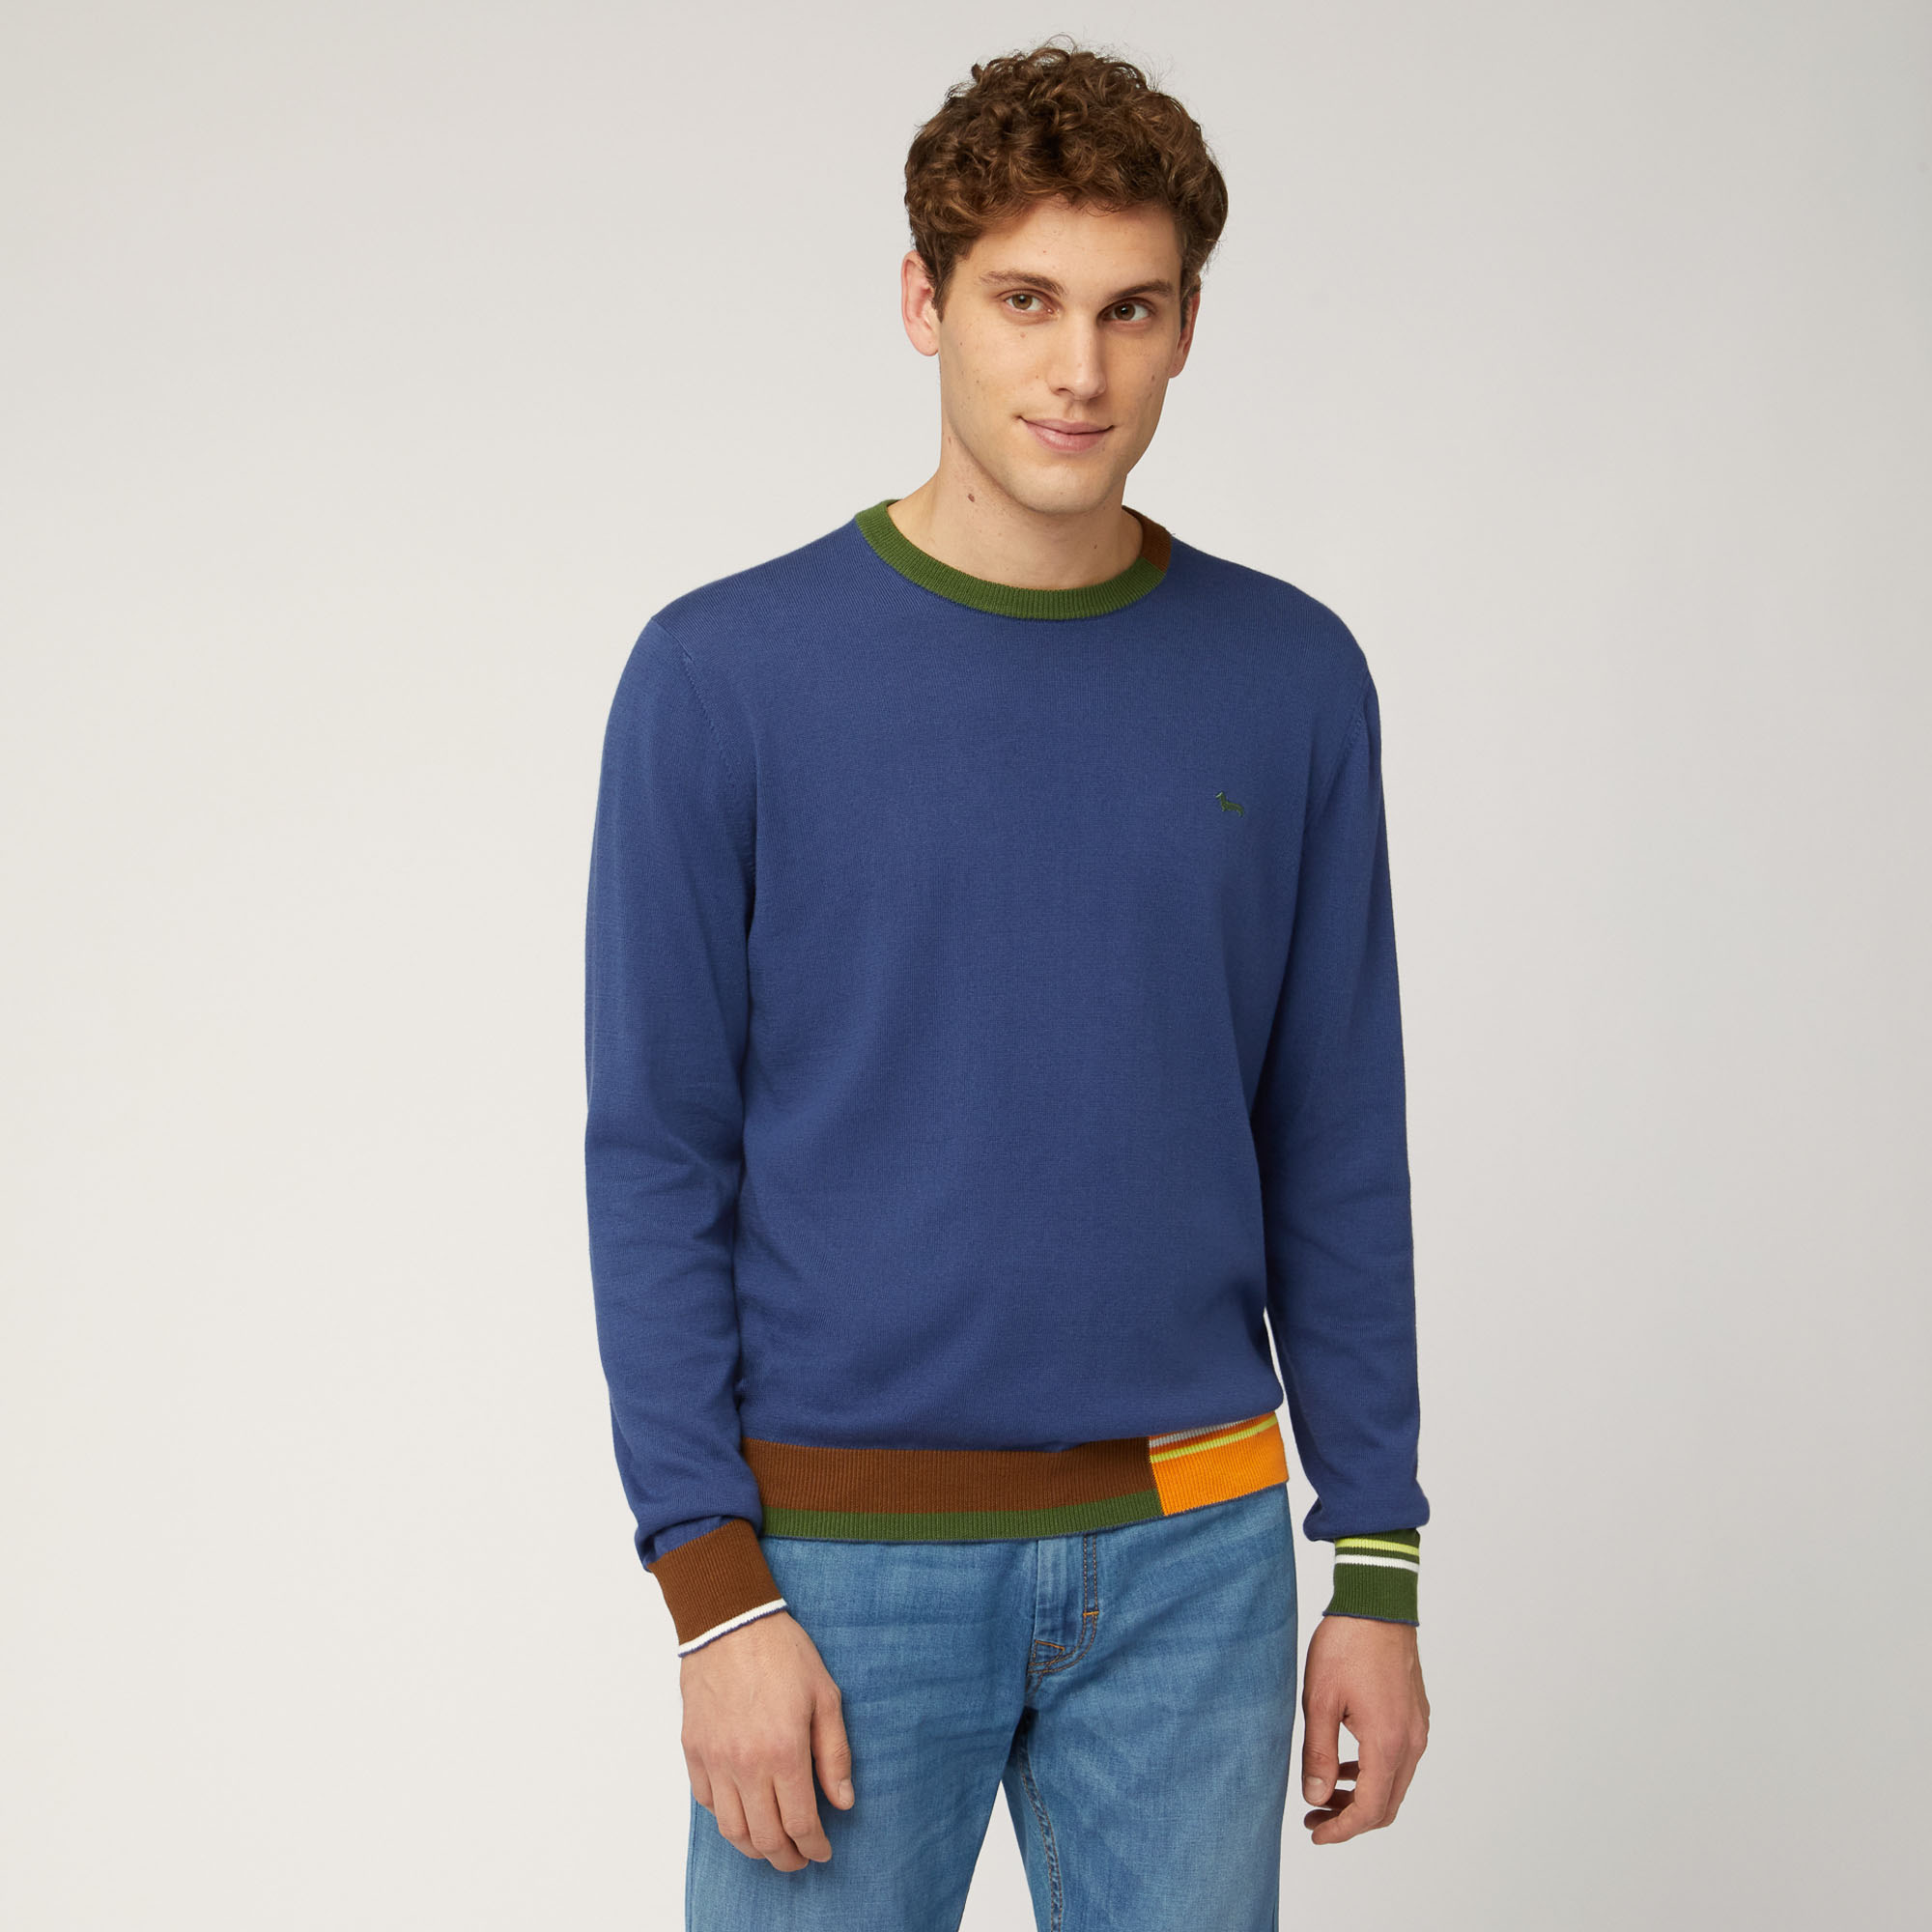 Organic Cotton Crew Neck Pullover with Color Block Details